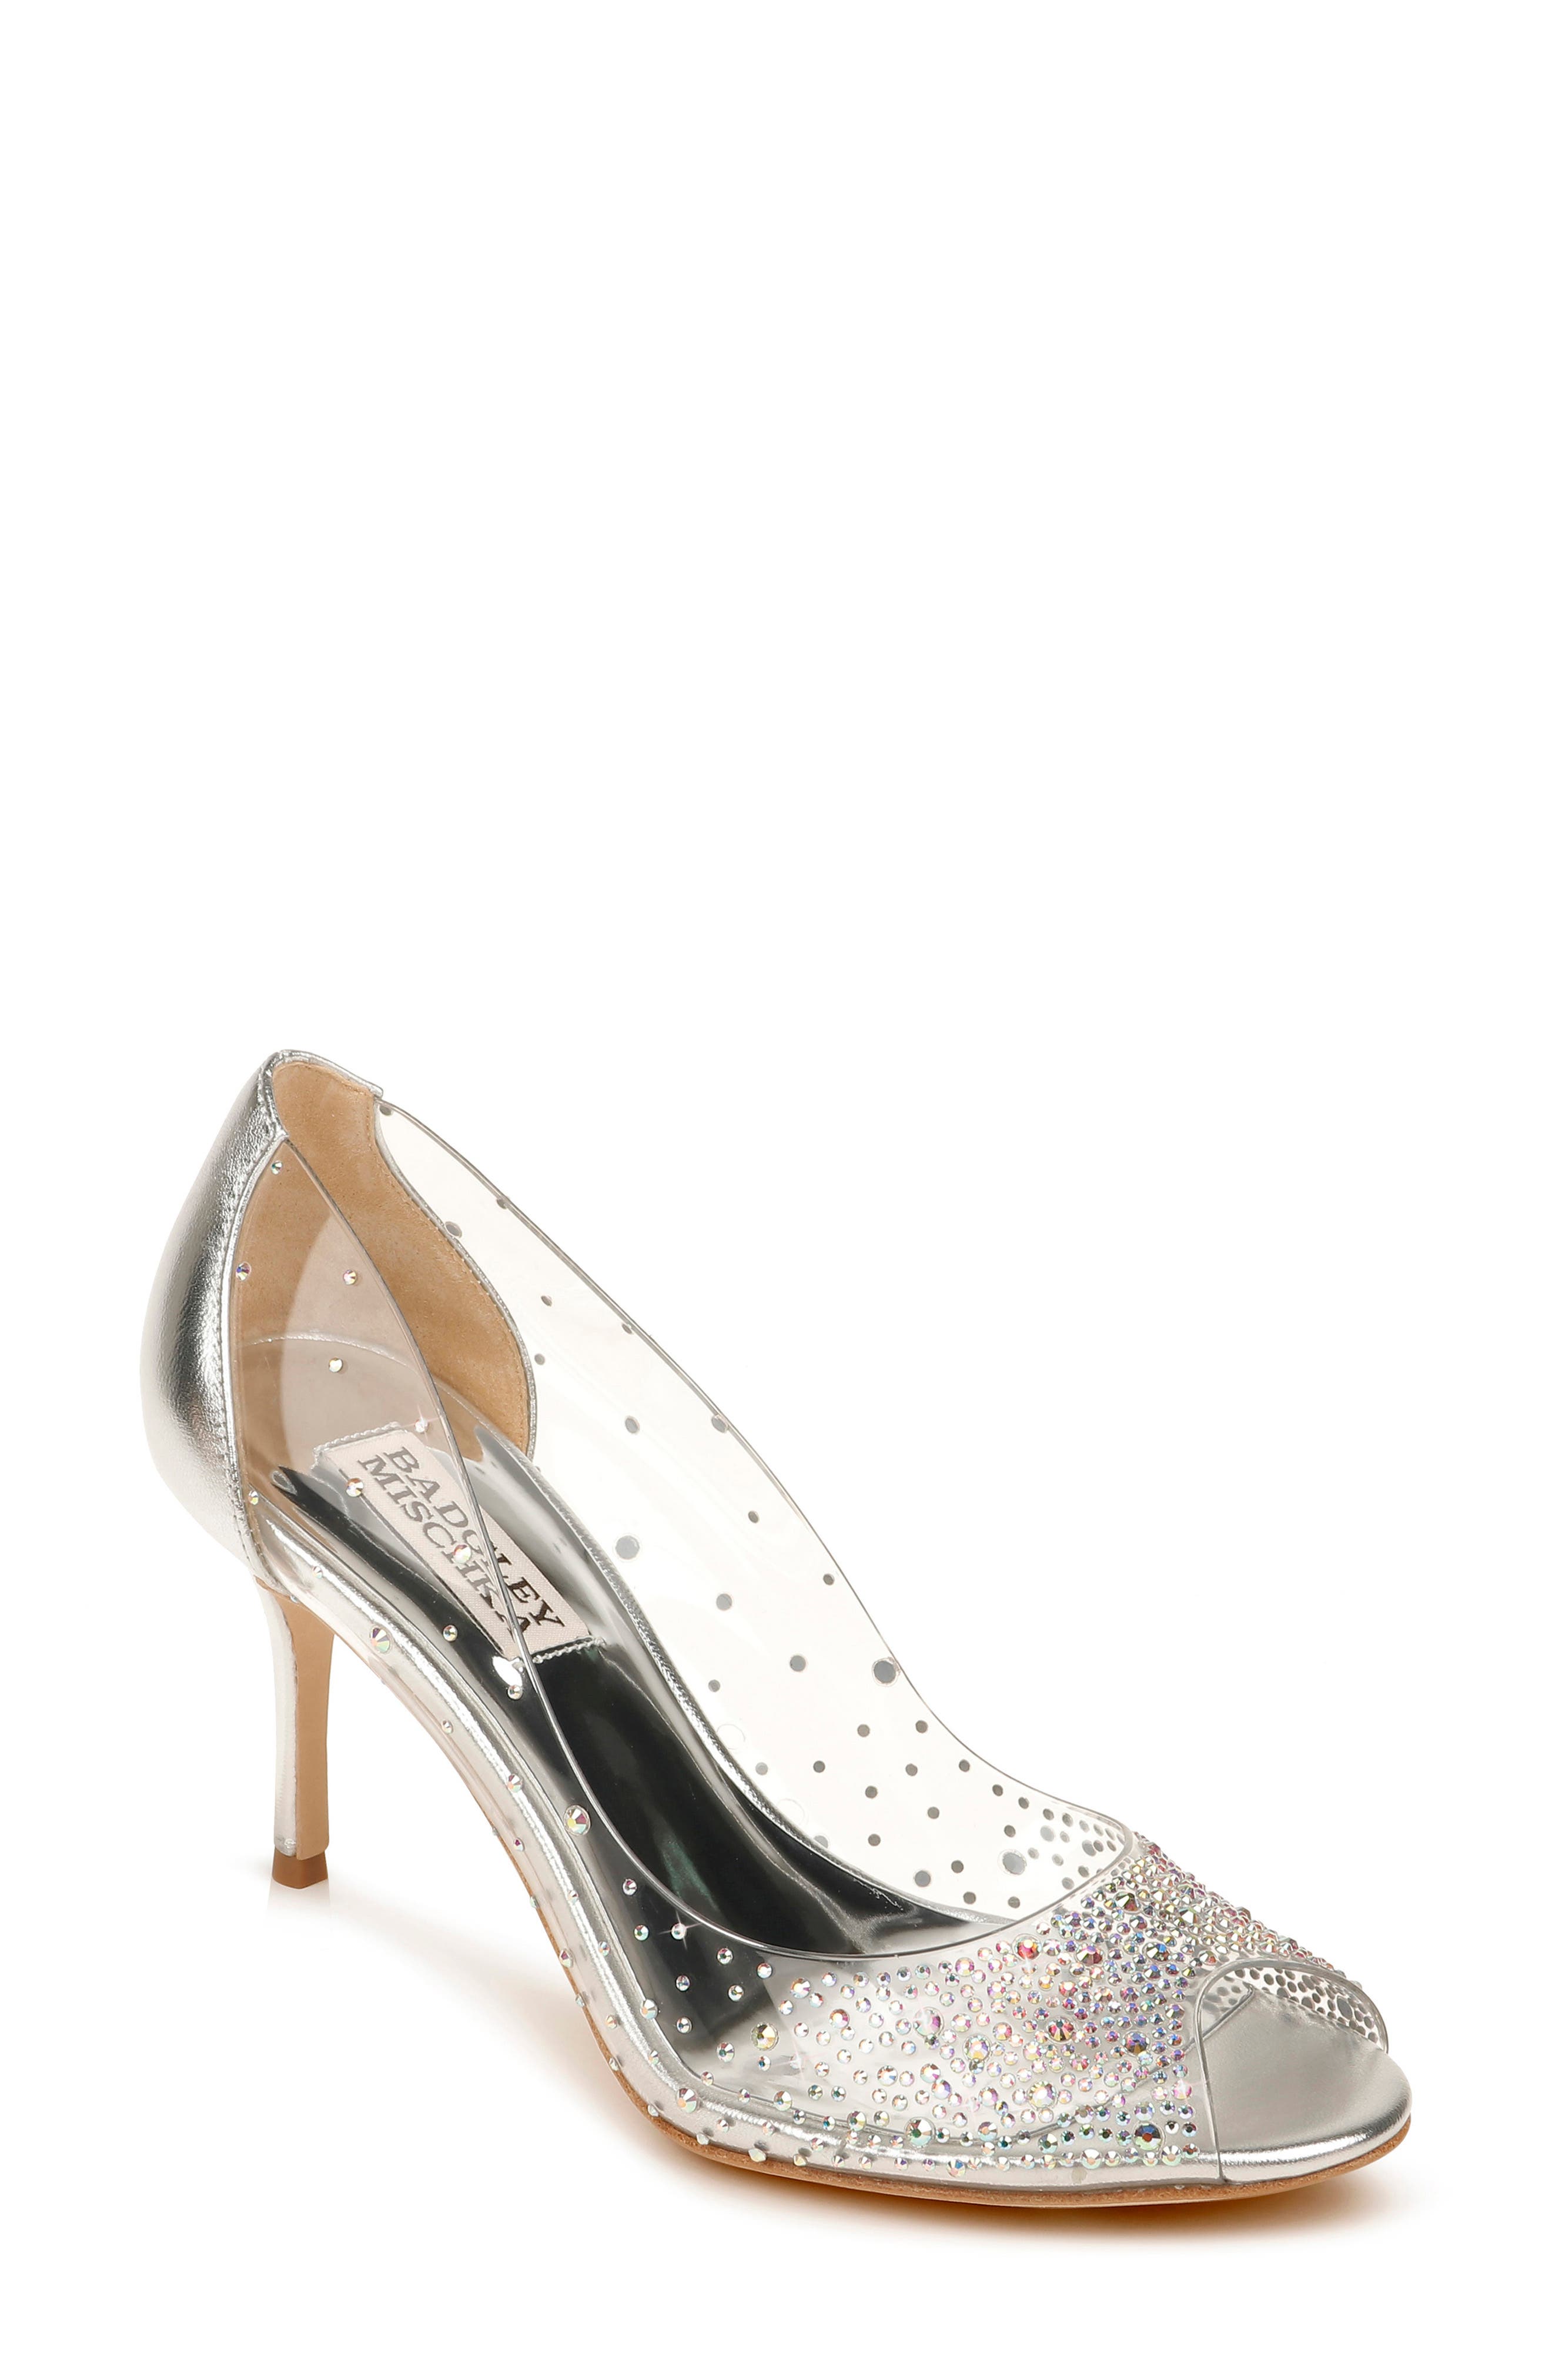 Badgley Mischka Collection Ginata Embellished Peep Toe Pump In Silver Nappa Leather